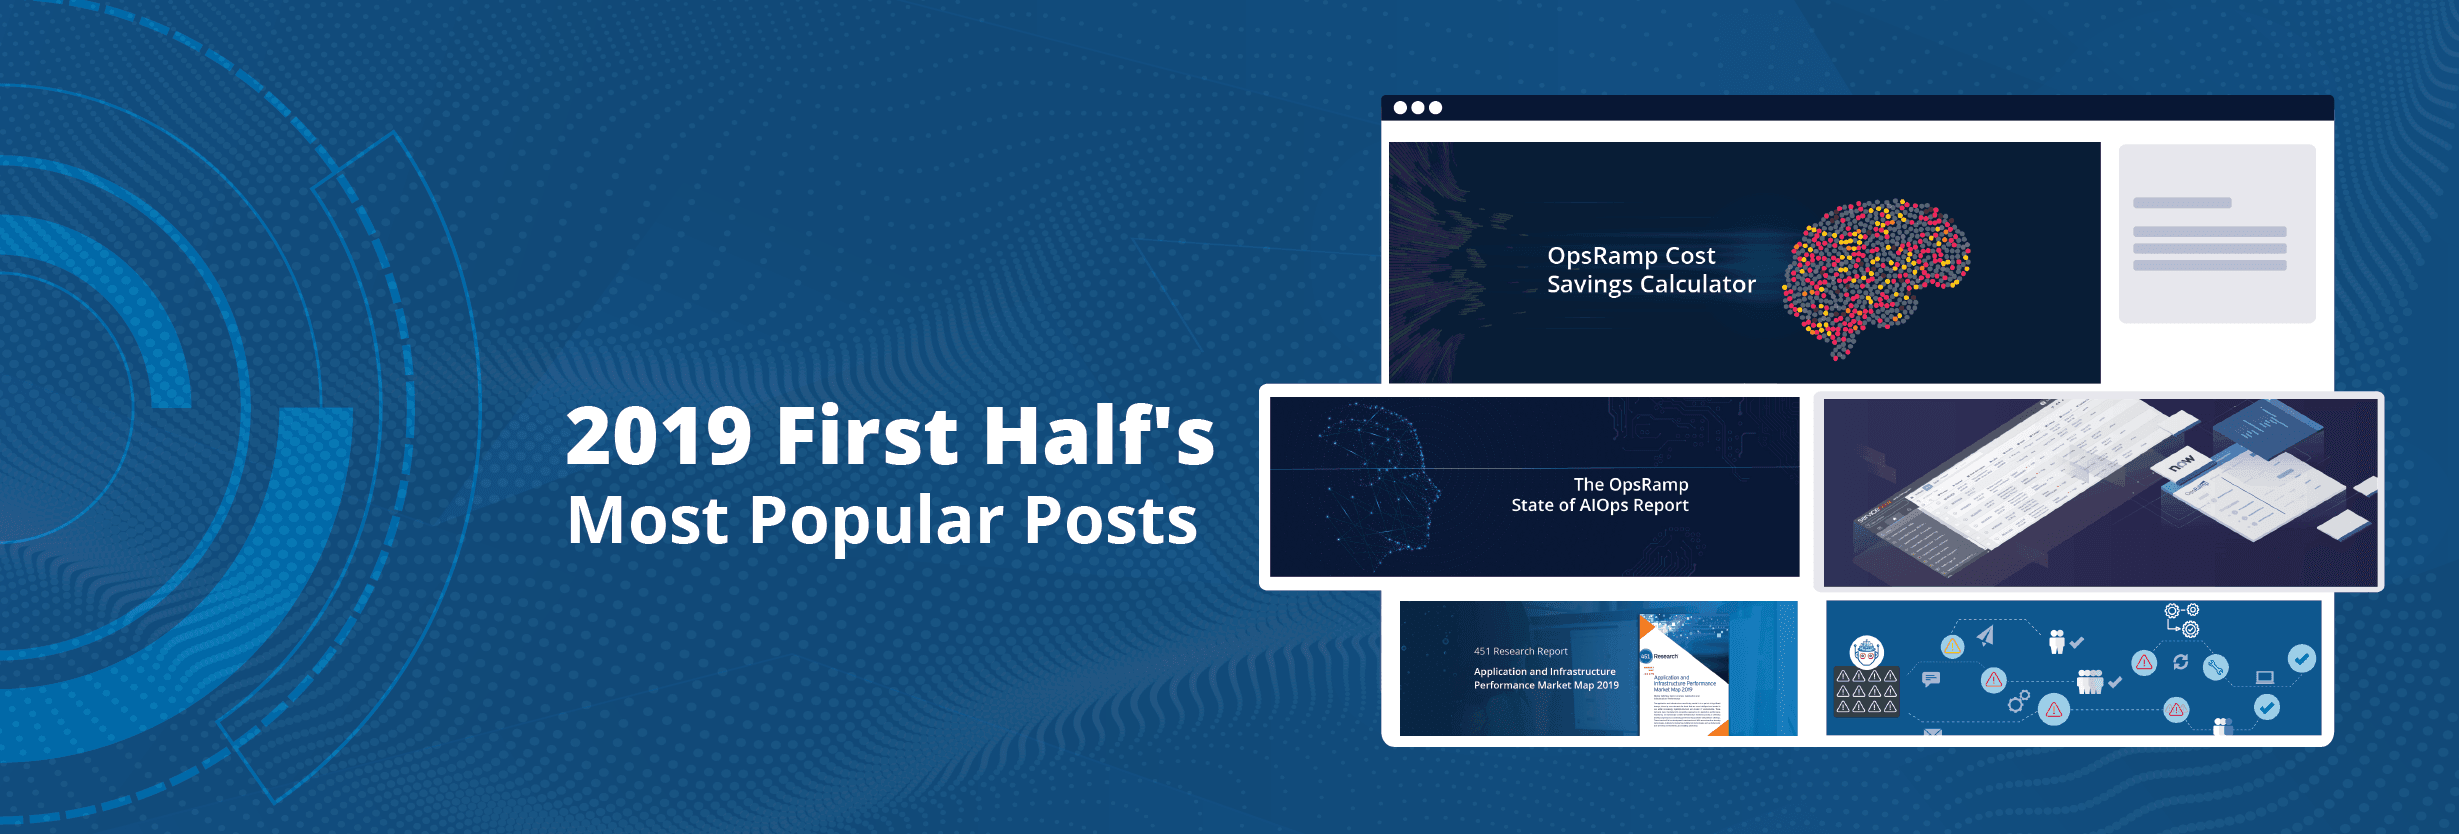 Our Must-Read Blog Posts from the First Half of 2019